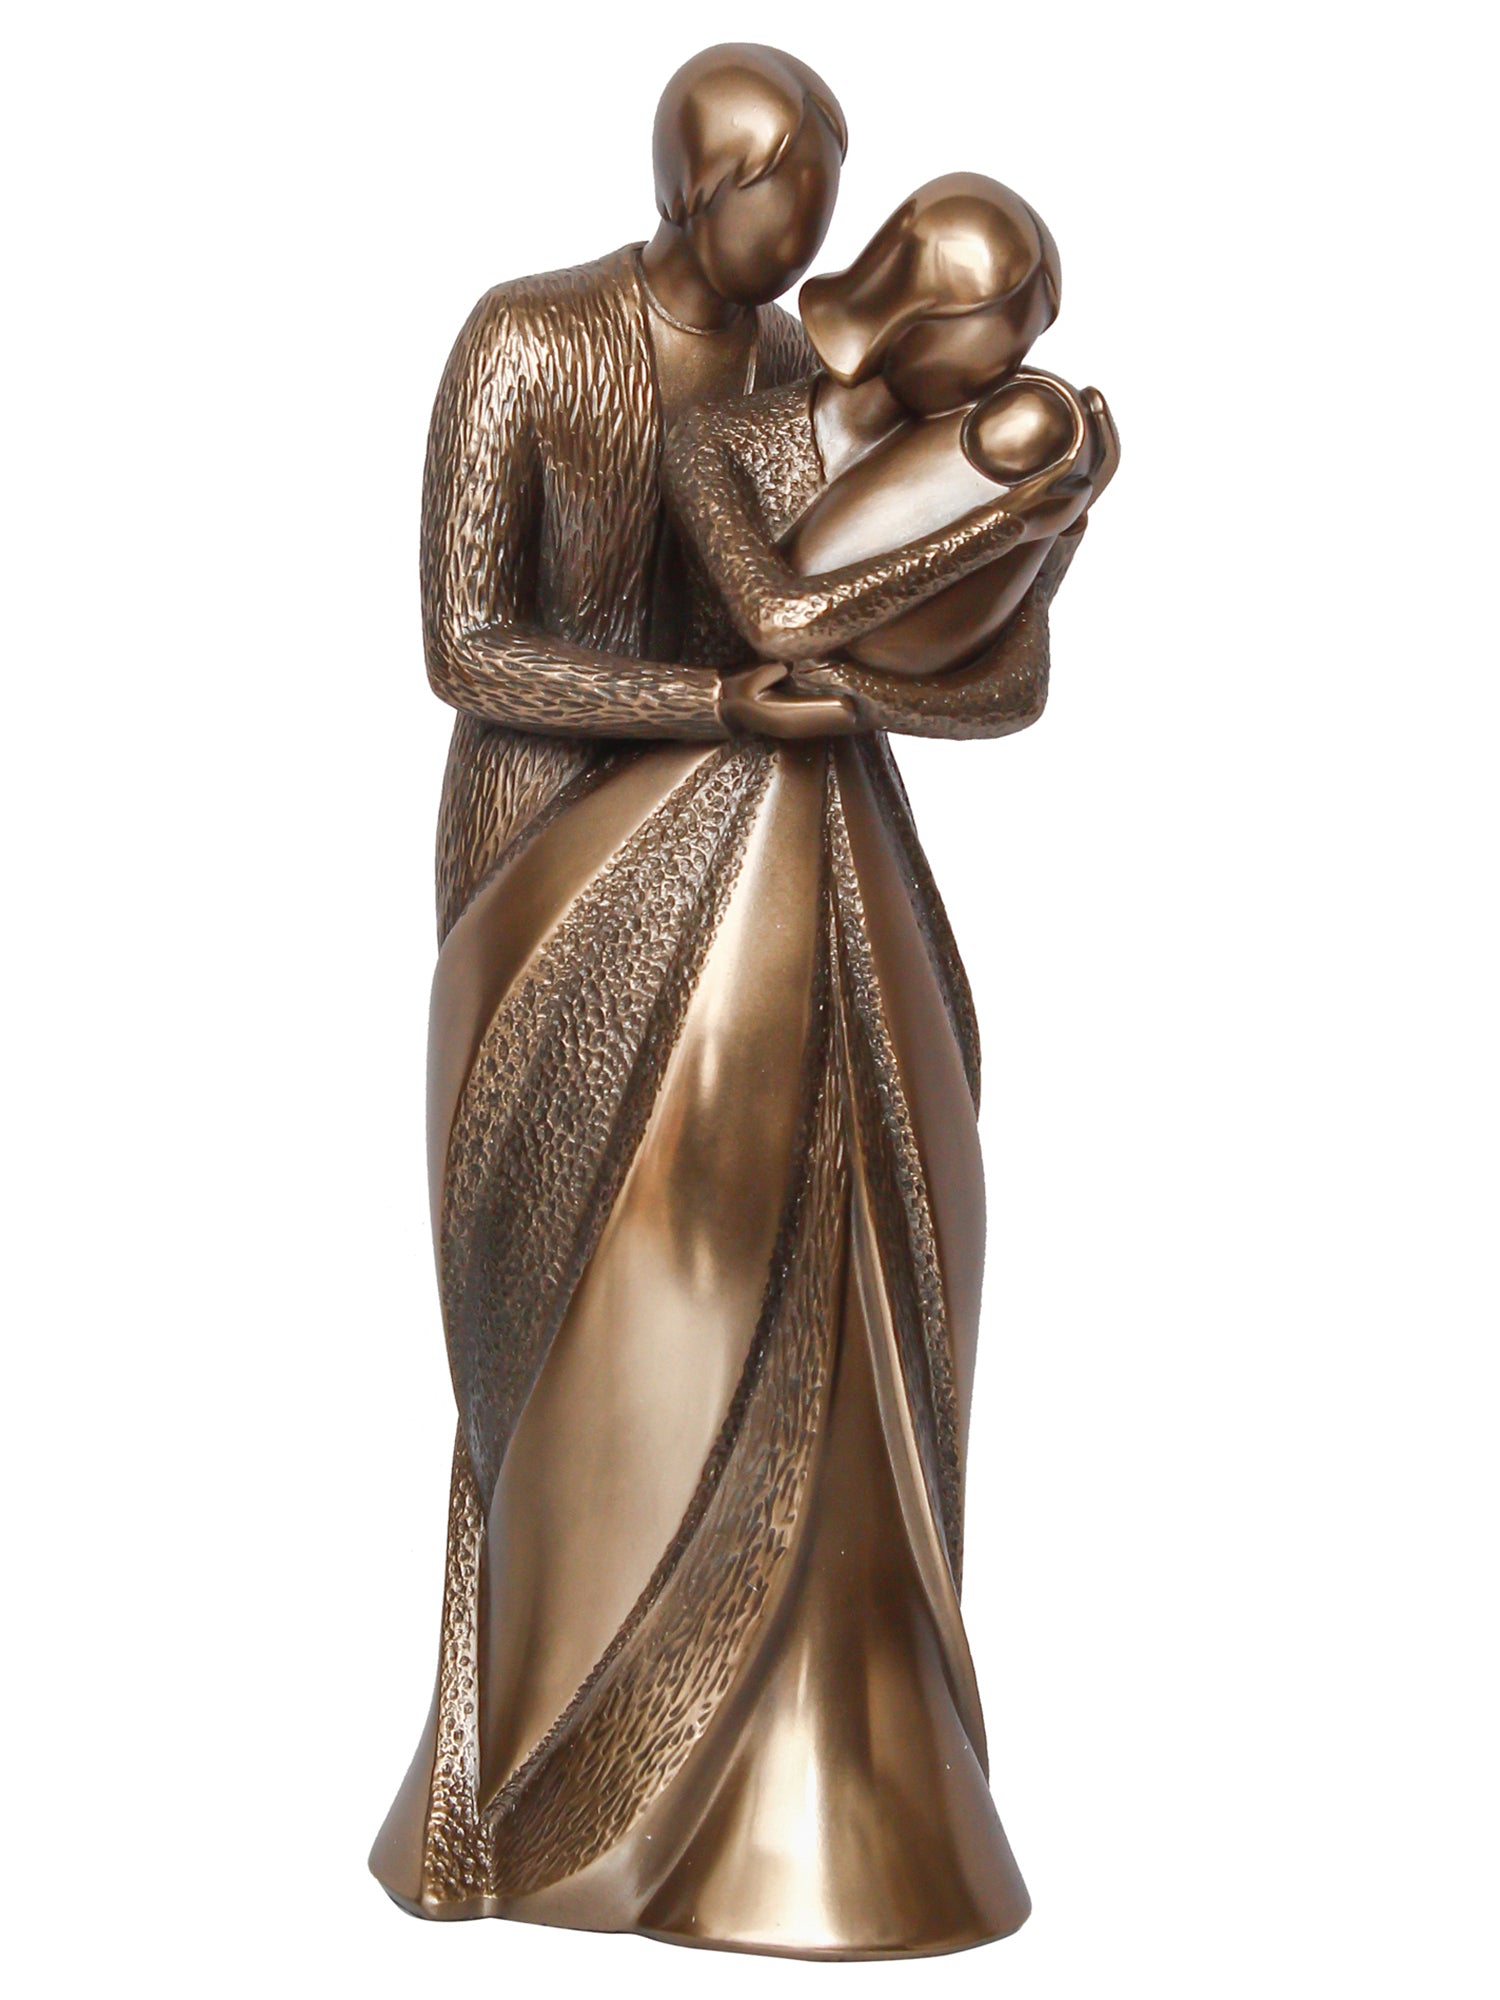 Brown Polyresin and Bronze Beloved Family of Husband, Wife and Kid Human Figurine Decorative Showpiece 4